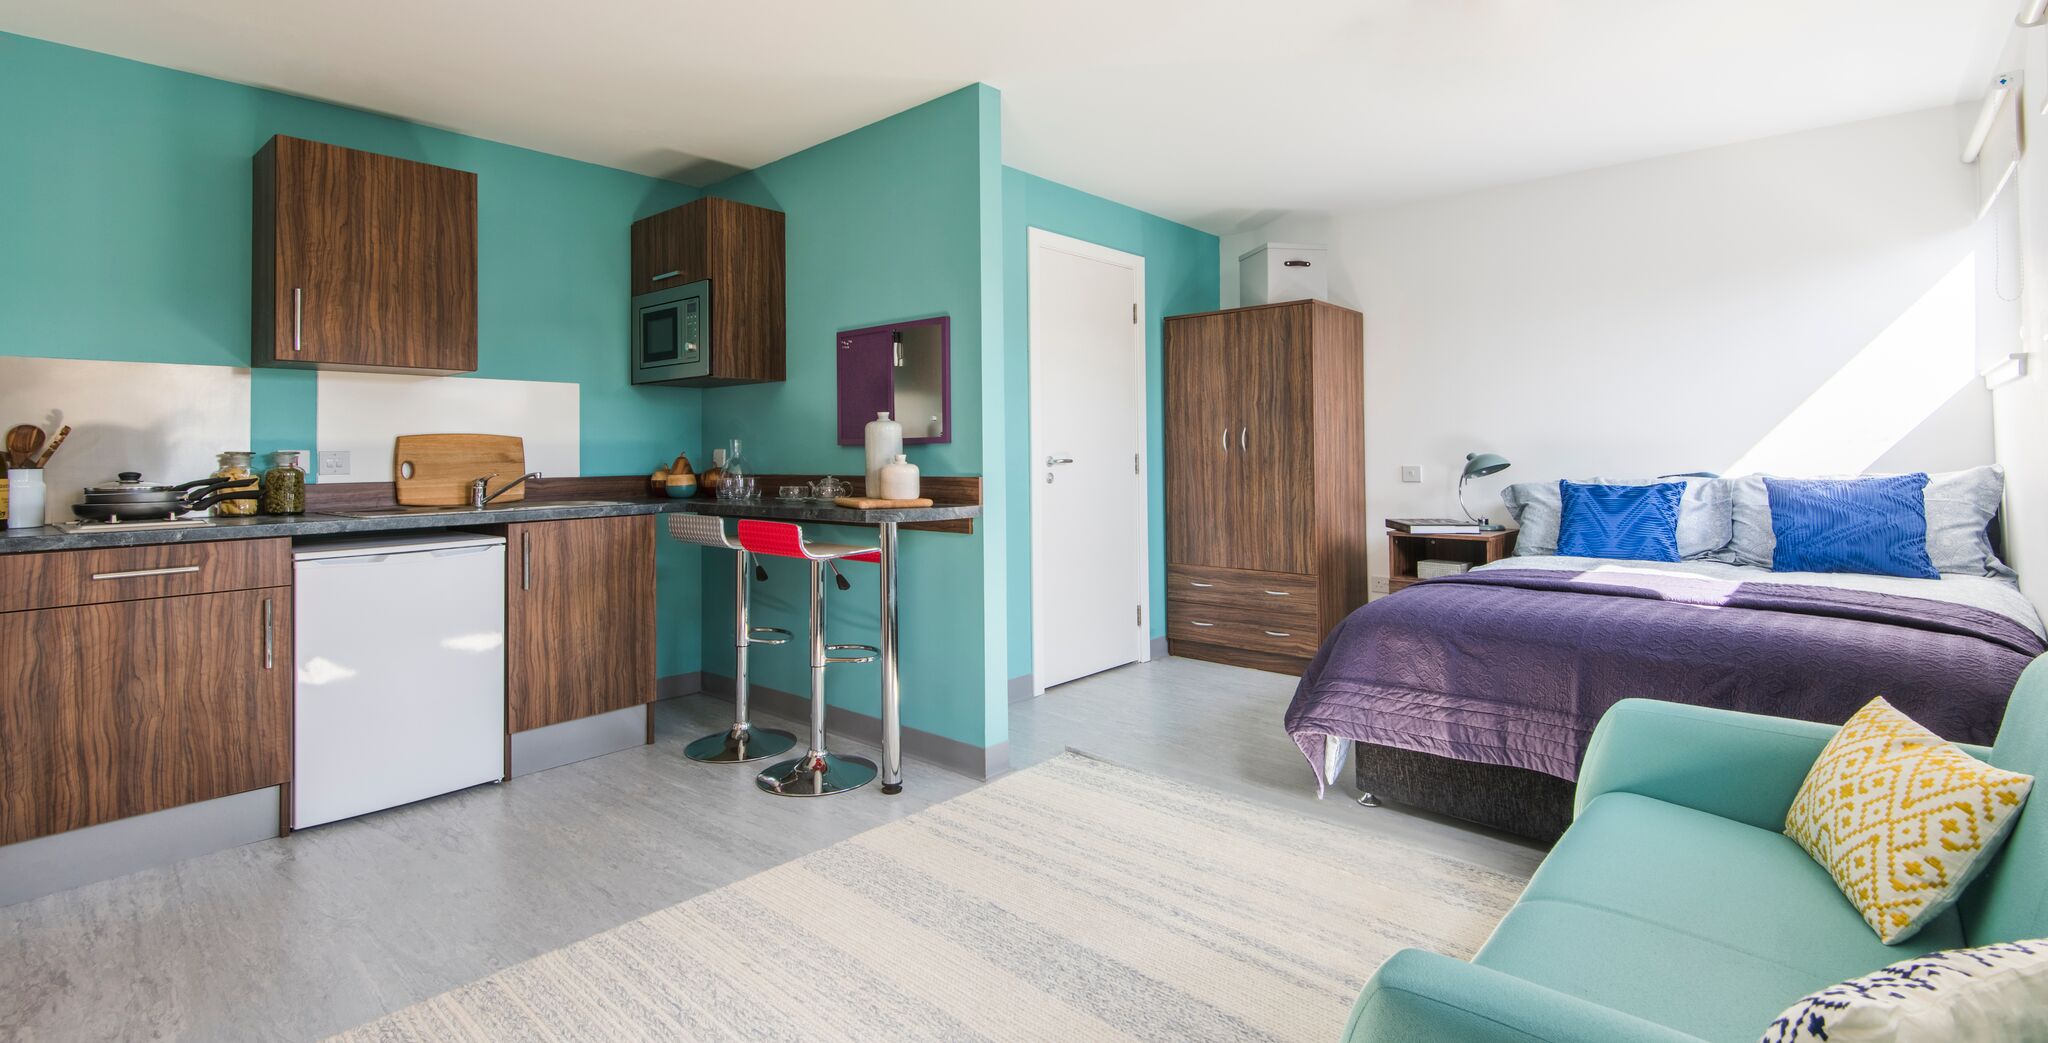 Study, sleep and socialise in the UK’s most luxurious student digs this coming academic year